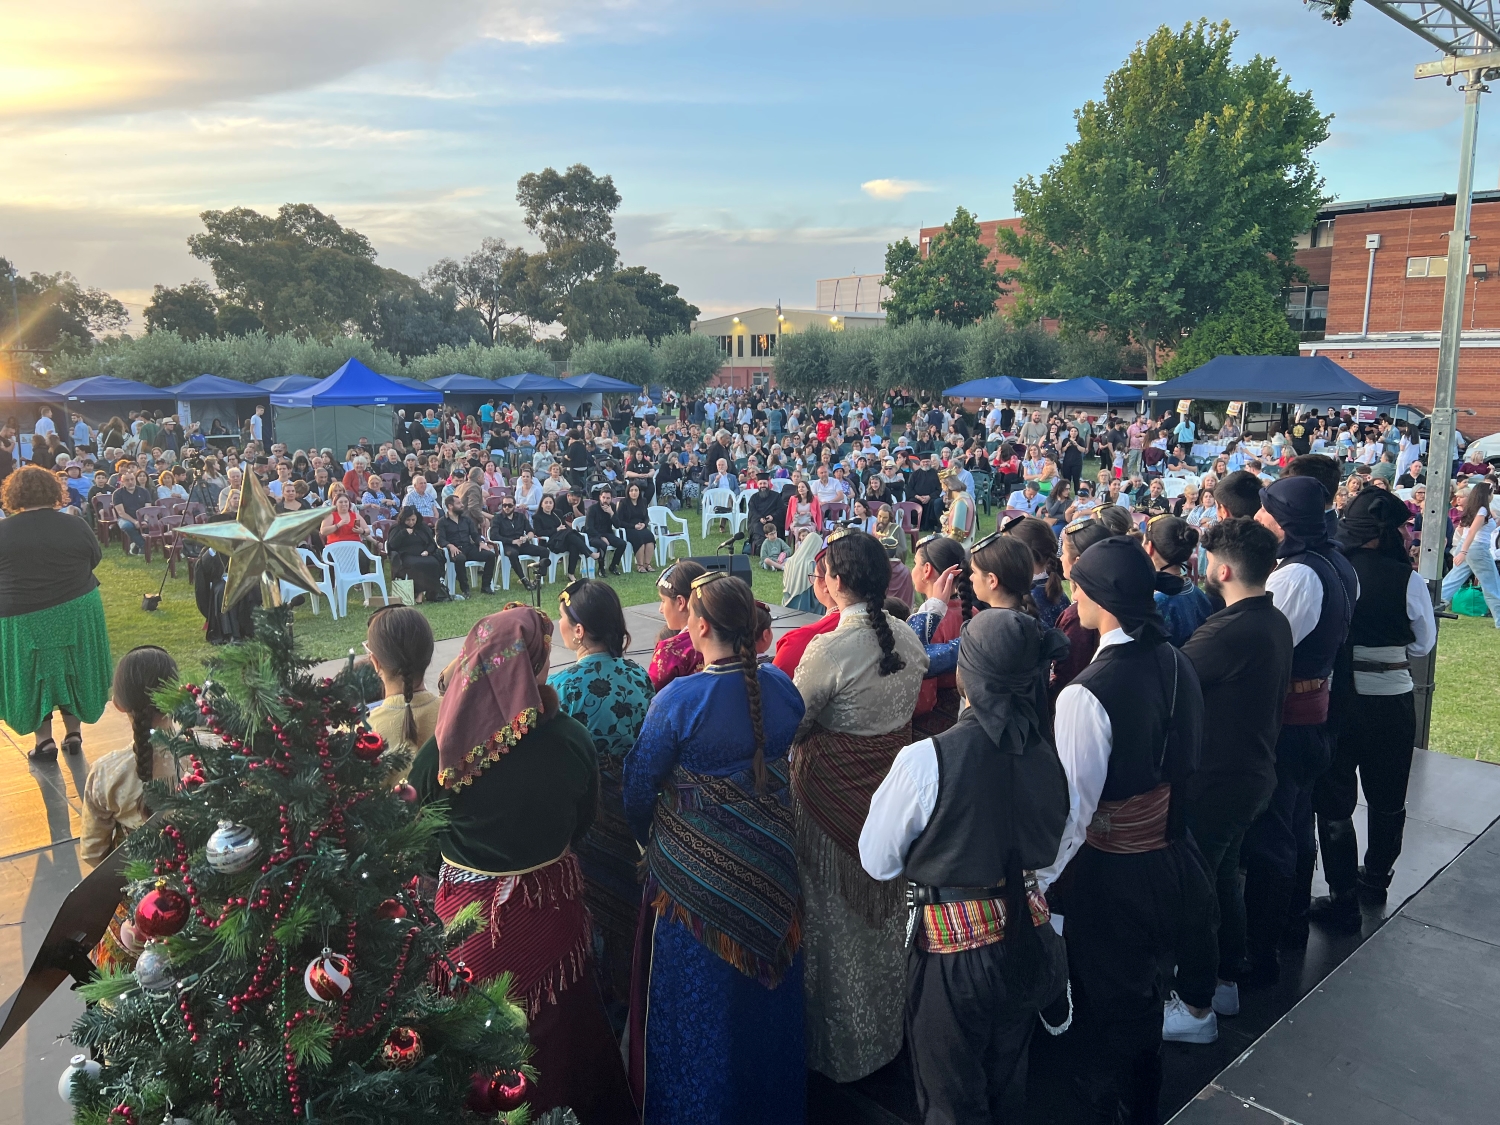 Melbourne: “Carols by Candlelight” dedicated to the memory of Stelios Tsiolas